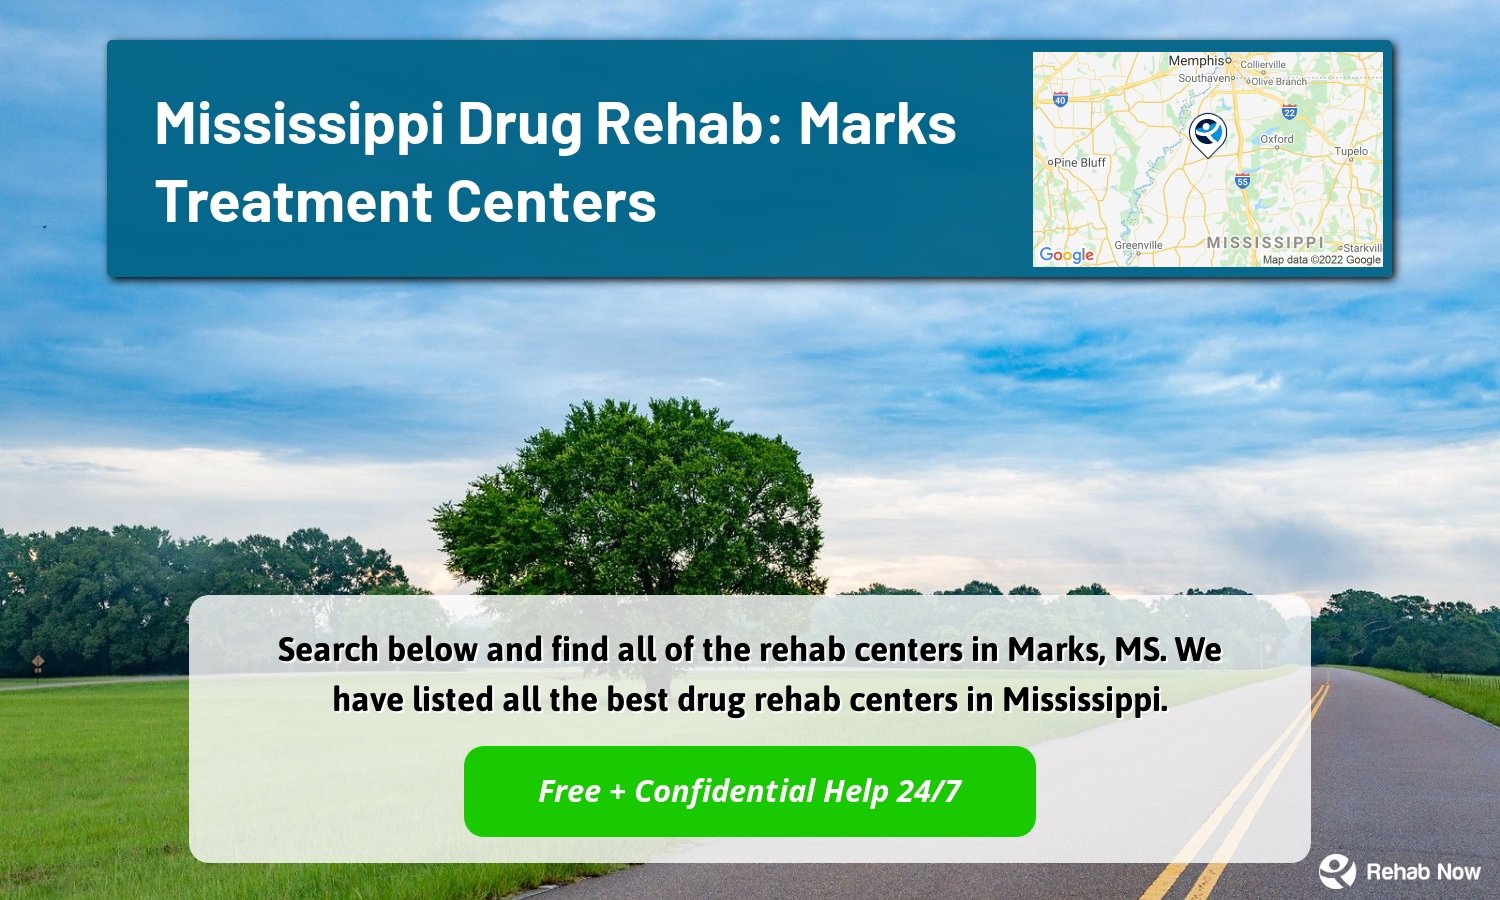 Search below and find all of the rehab centers in Marks, MS. We have listed all the best drug rehab centers in Mississippi.